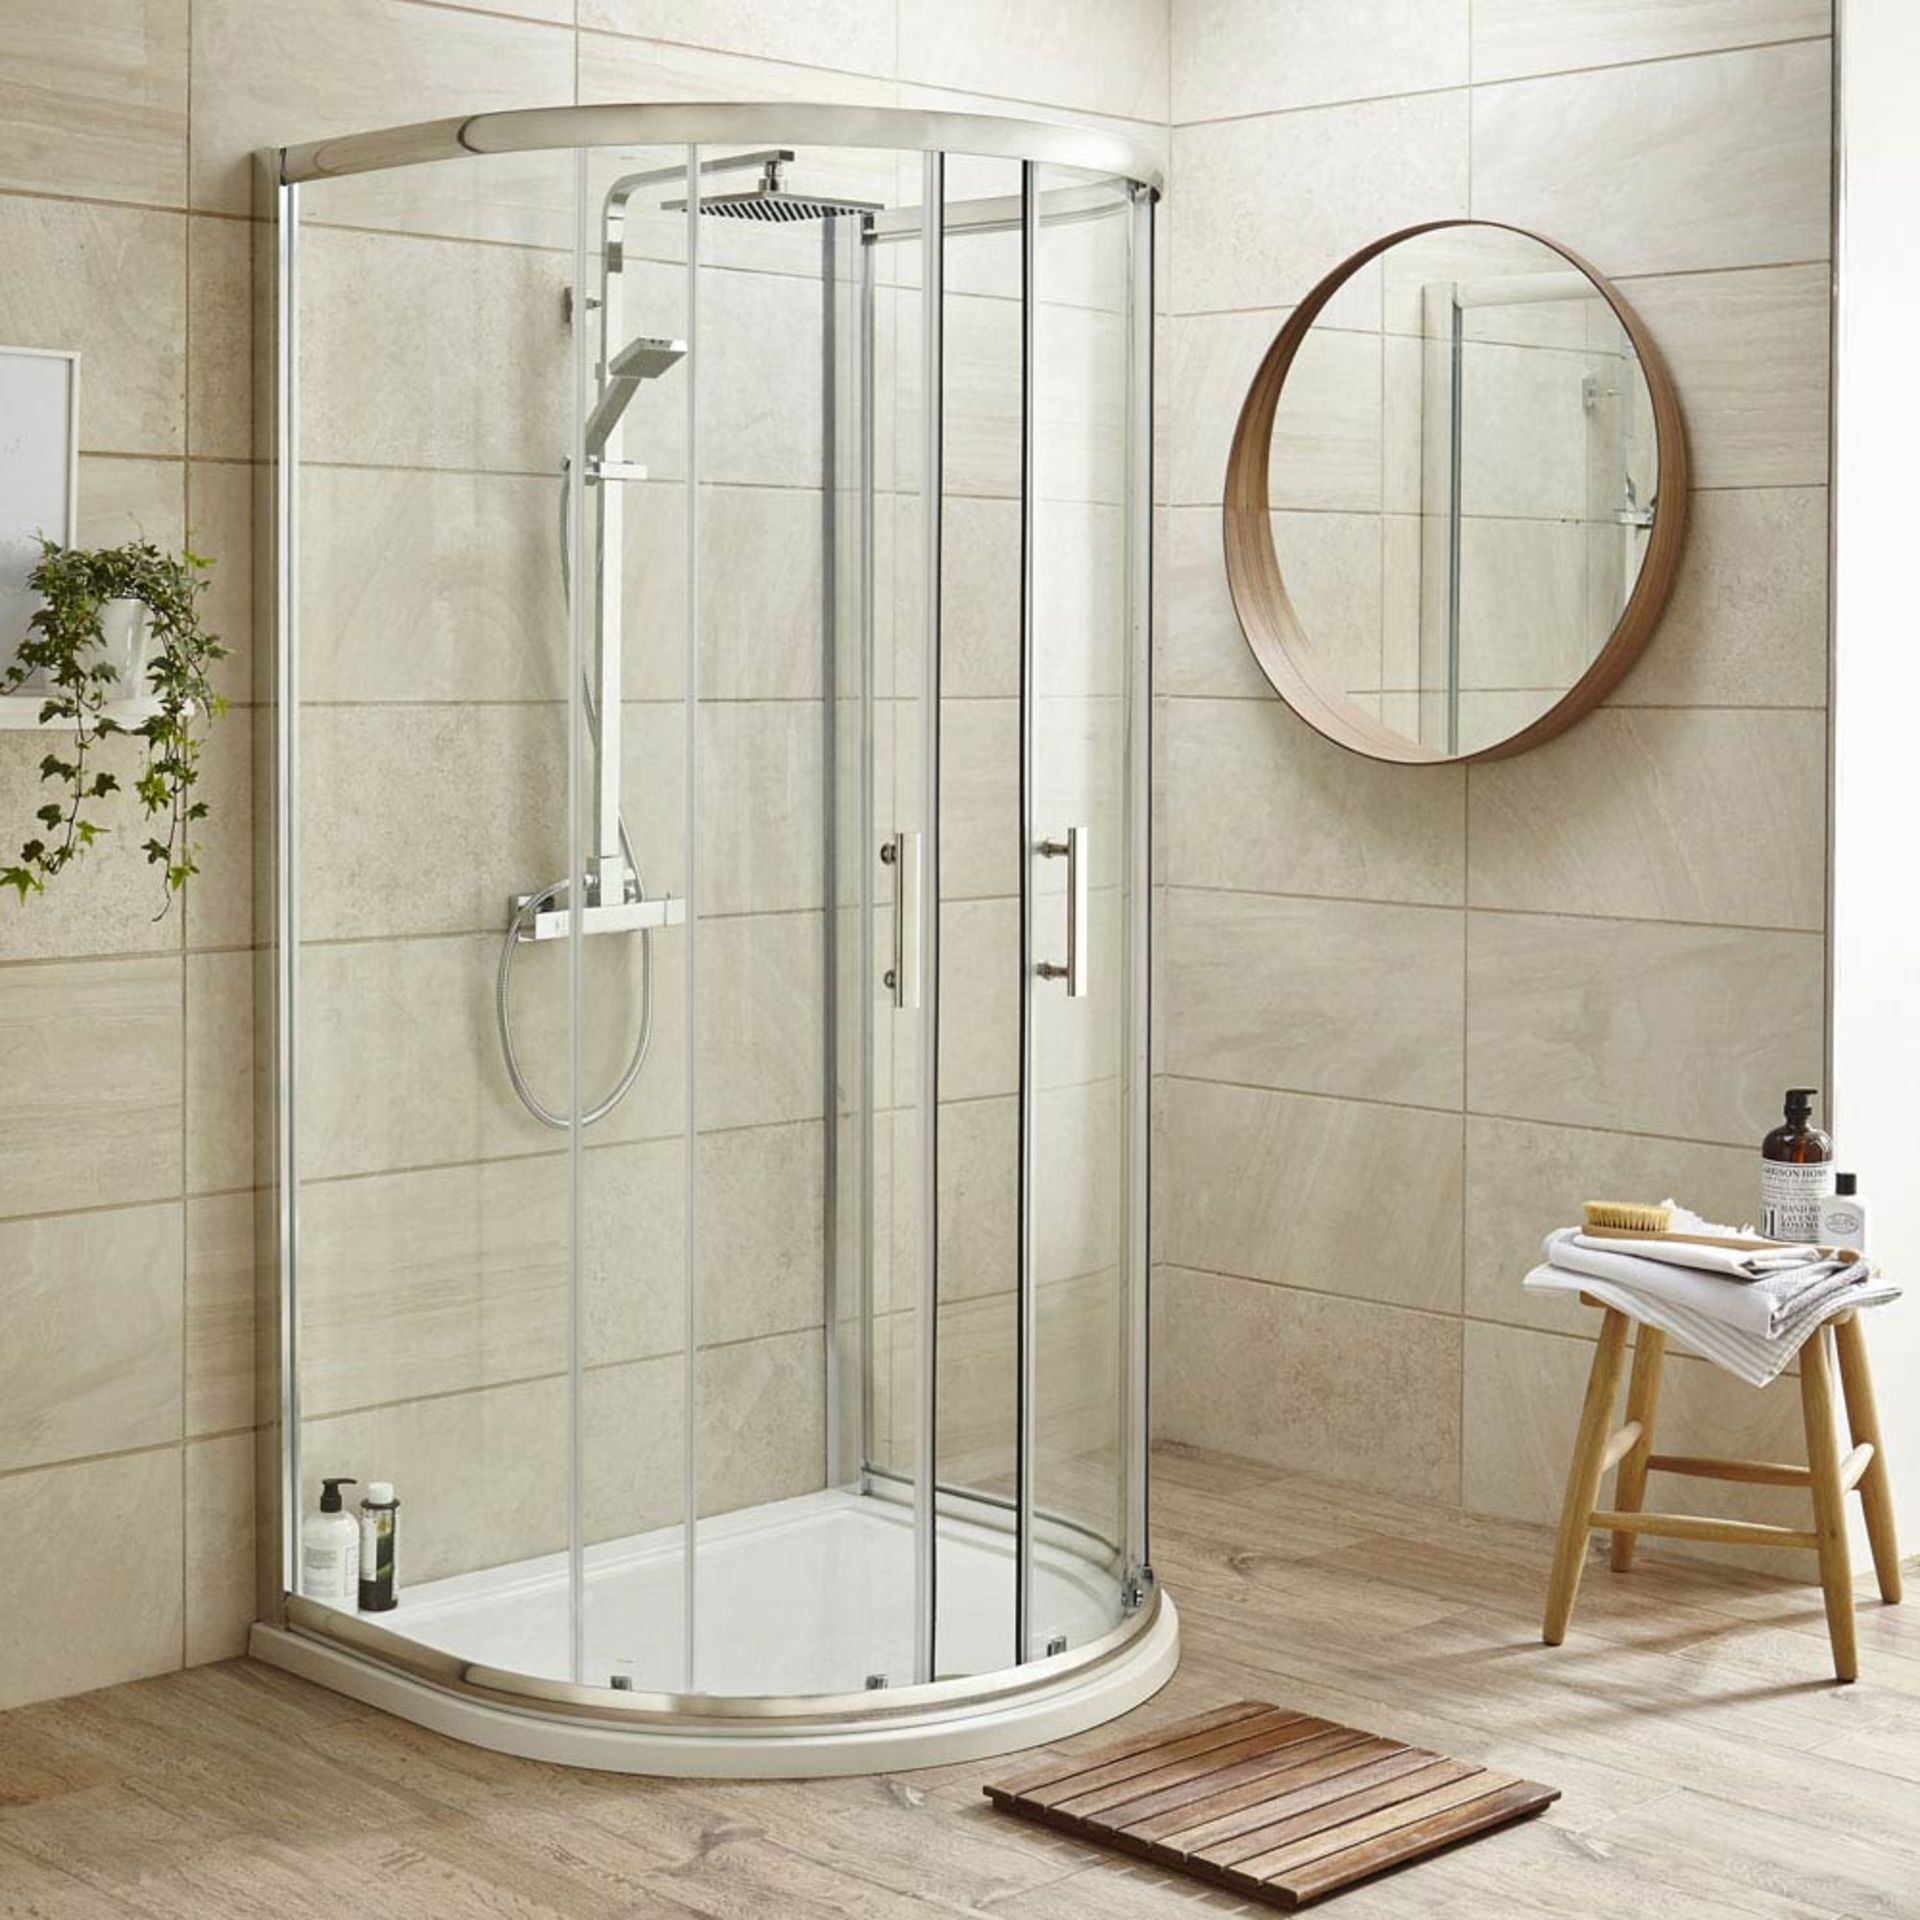 NEW (PC41) Twyfords 770mm Hydro D Shape White Shower tray.Low profile ultra slim design Gel coa... - Image 3 of 3